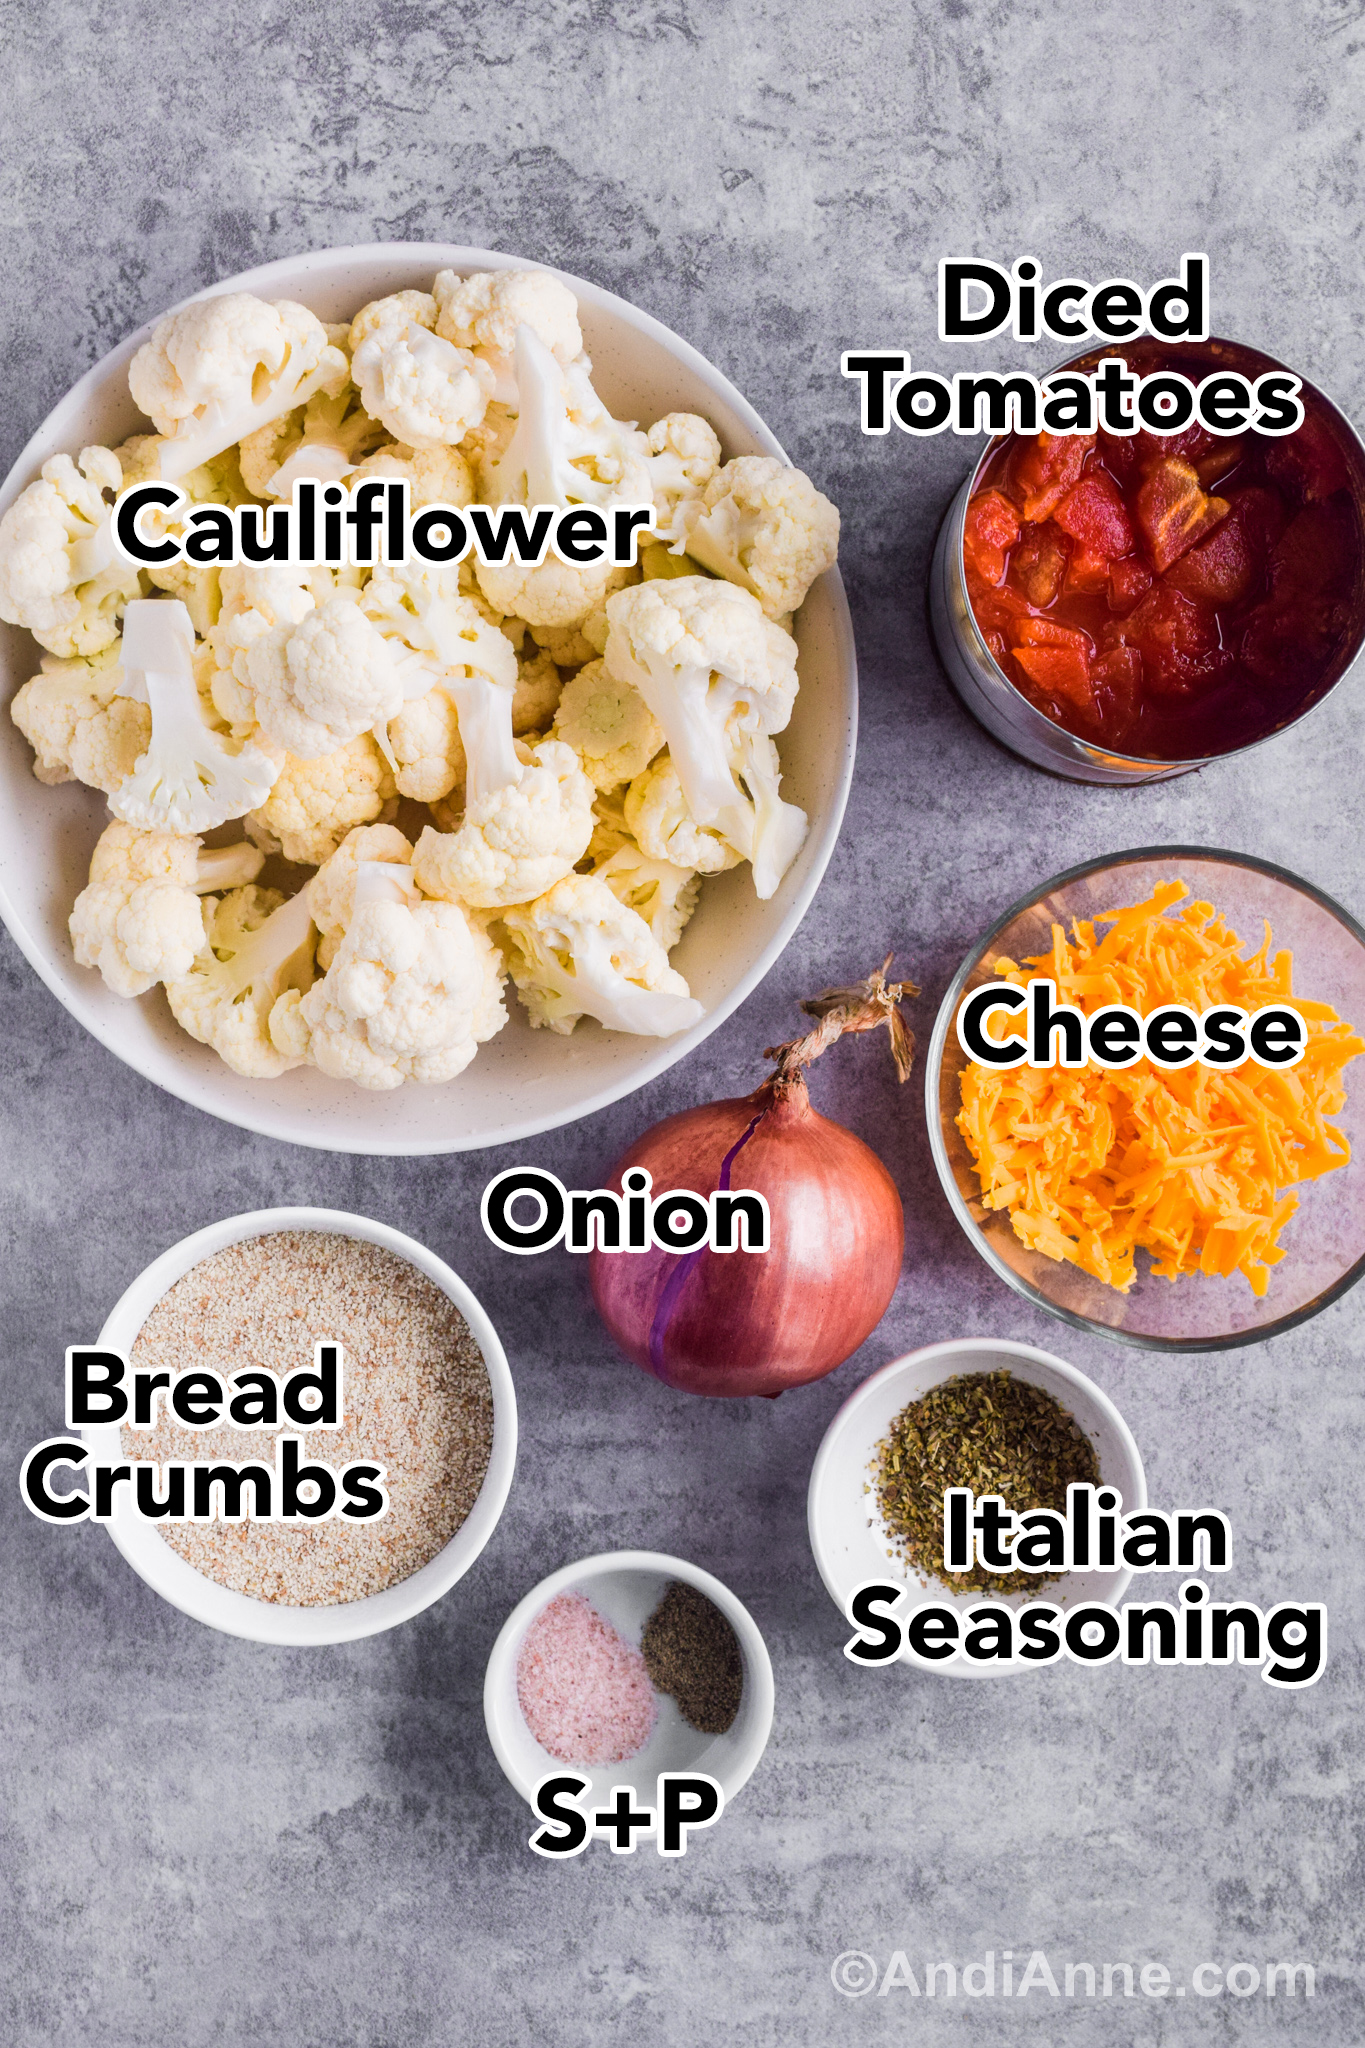 Recipe ingredients on the counter including a bowl of chopped cauliflower, canned diced tomatoes, shredded cheese, onion, breadcrumbs and herbs.